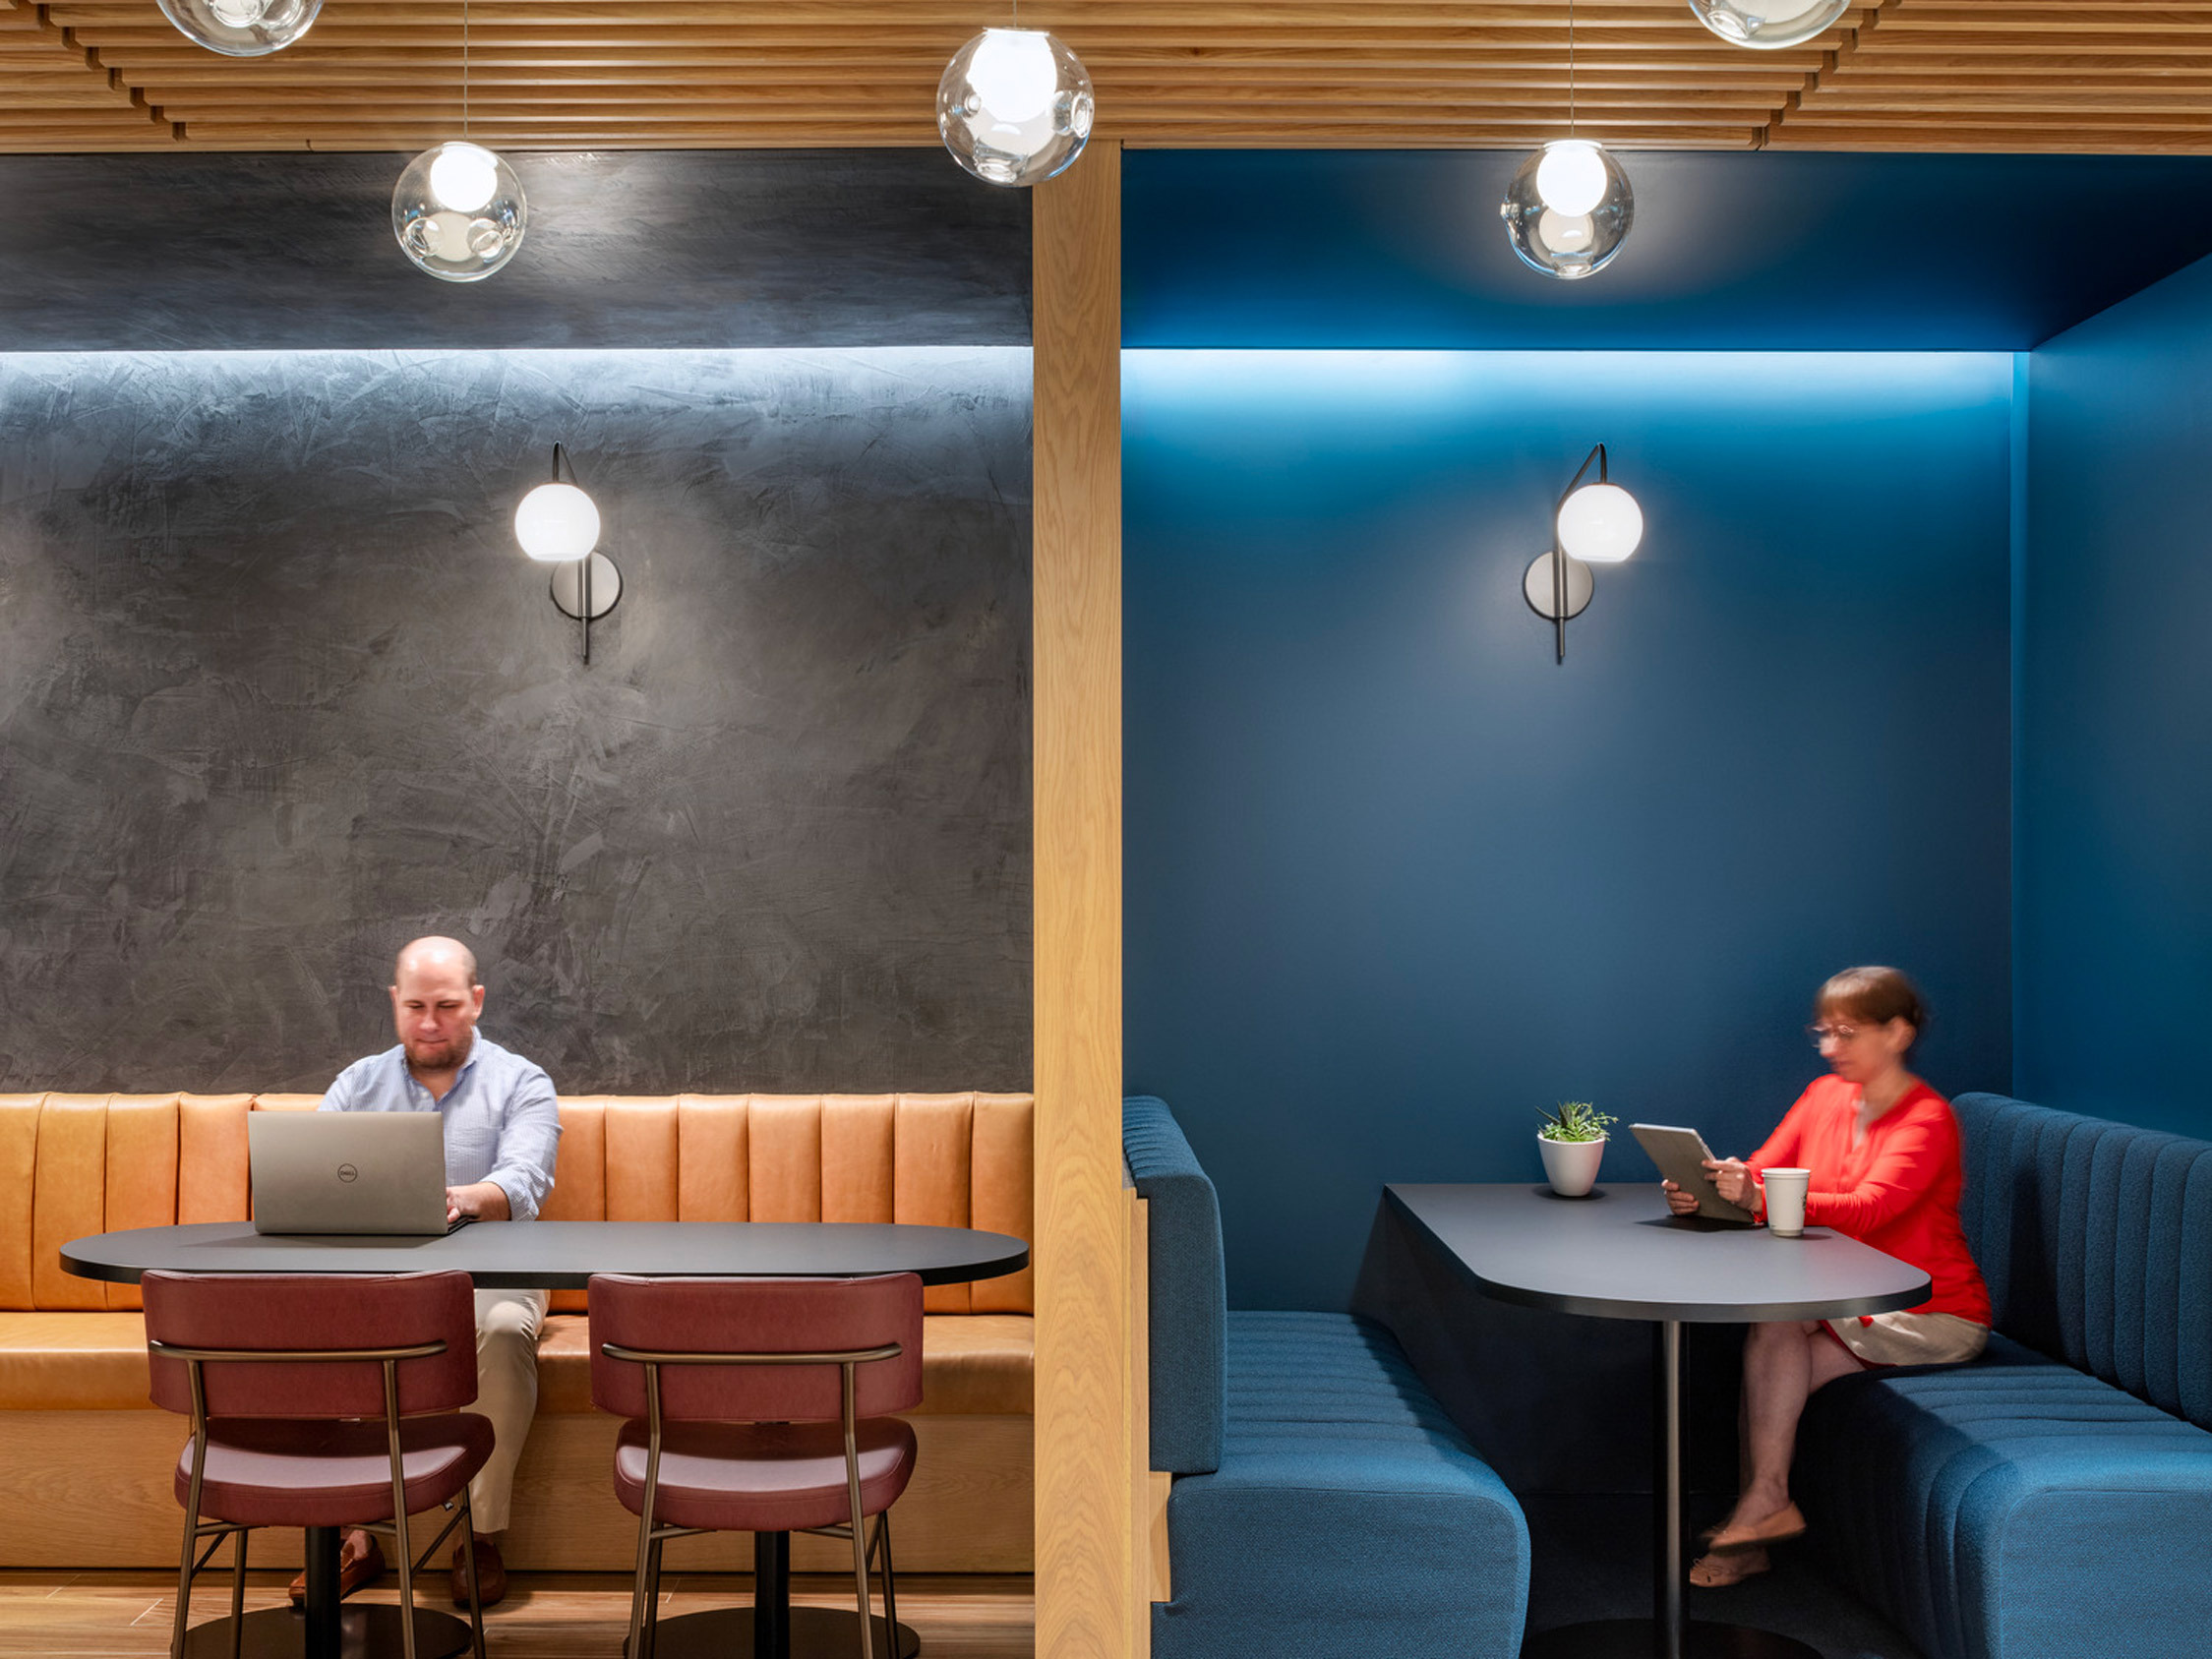 Modern office breakout area featuring cobalt blue walls, warm wood accents, and integrated lighting. Mustard-toned, tufted seating complements the space while professionals engage in focused work at individual tables.